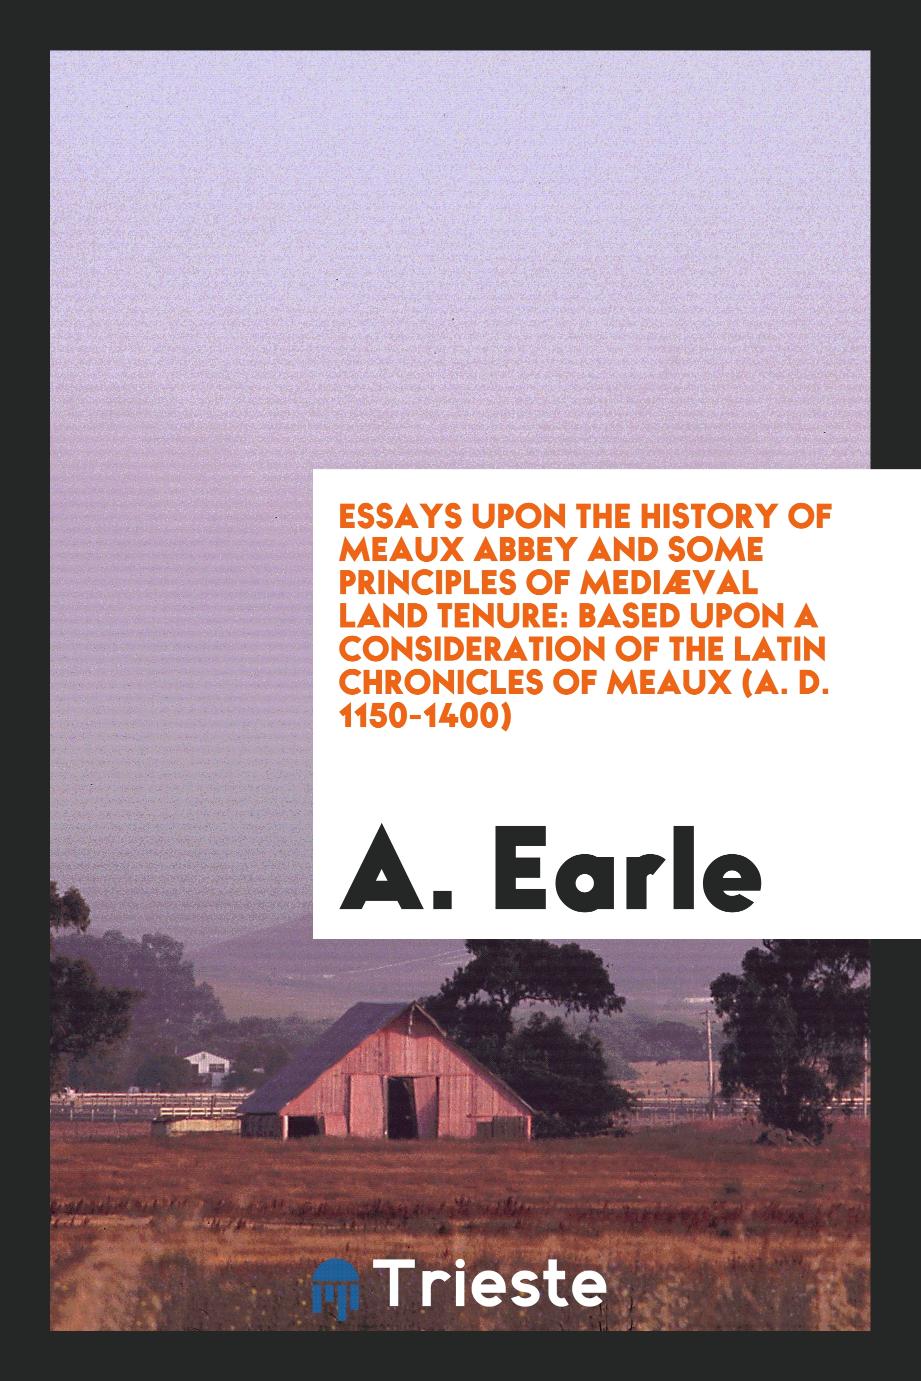 Essays upon the History of Meaux Abbey and Some Principles of Mediæval Land Tenure: Based upon a Consideration of the Latin Chronicles of Meaux (A. D. 1150-1400)